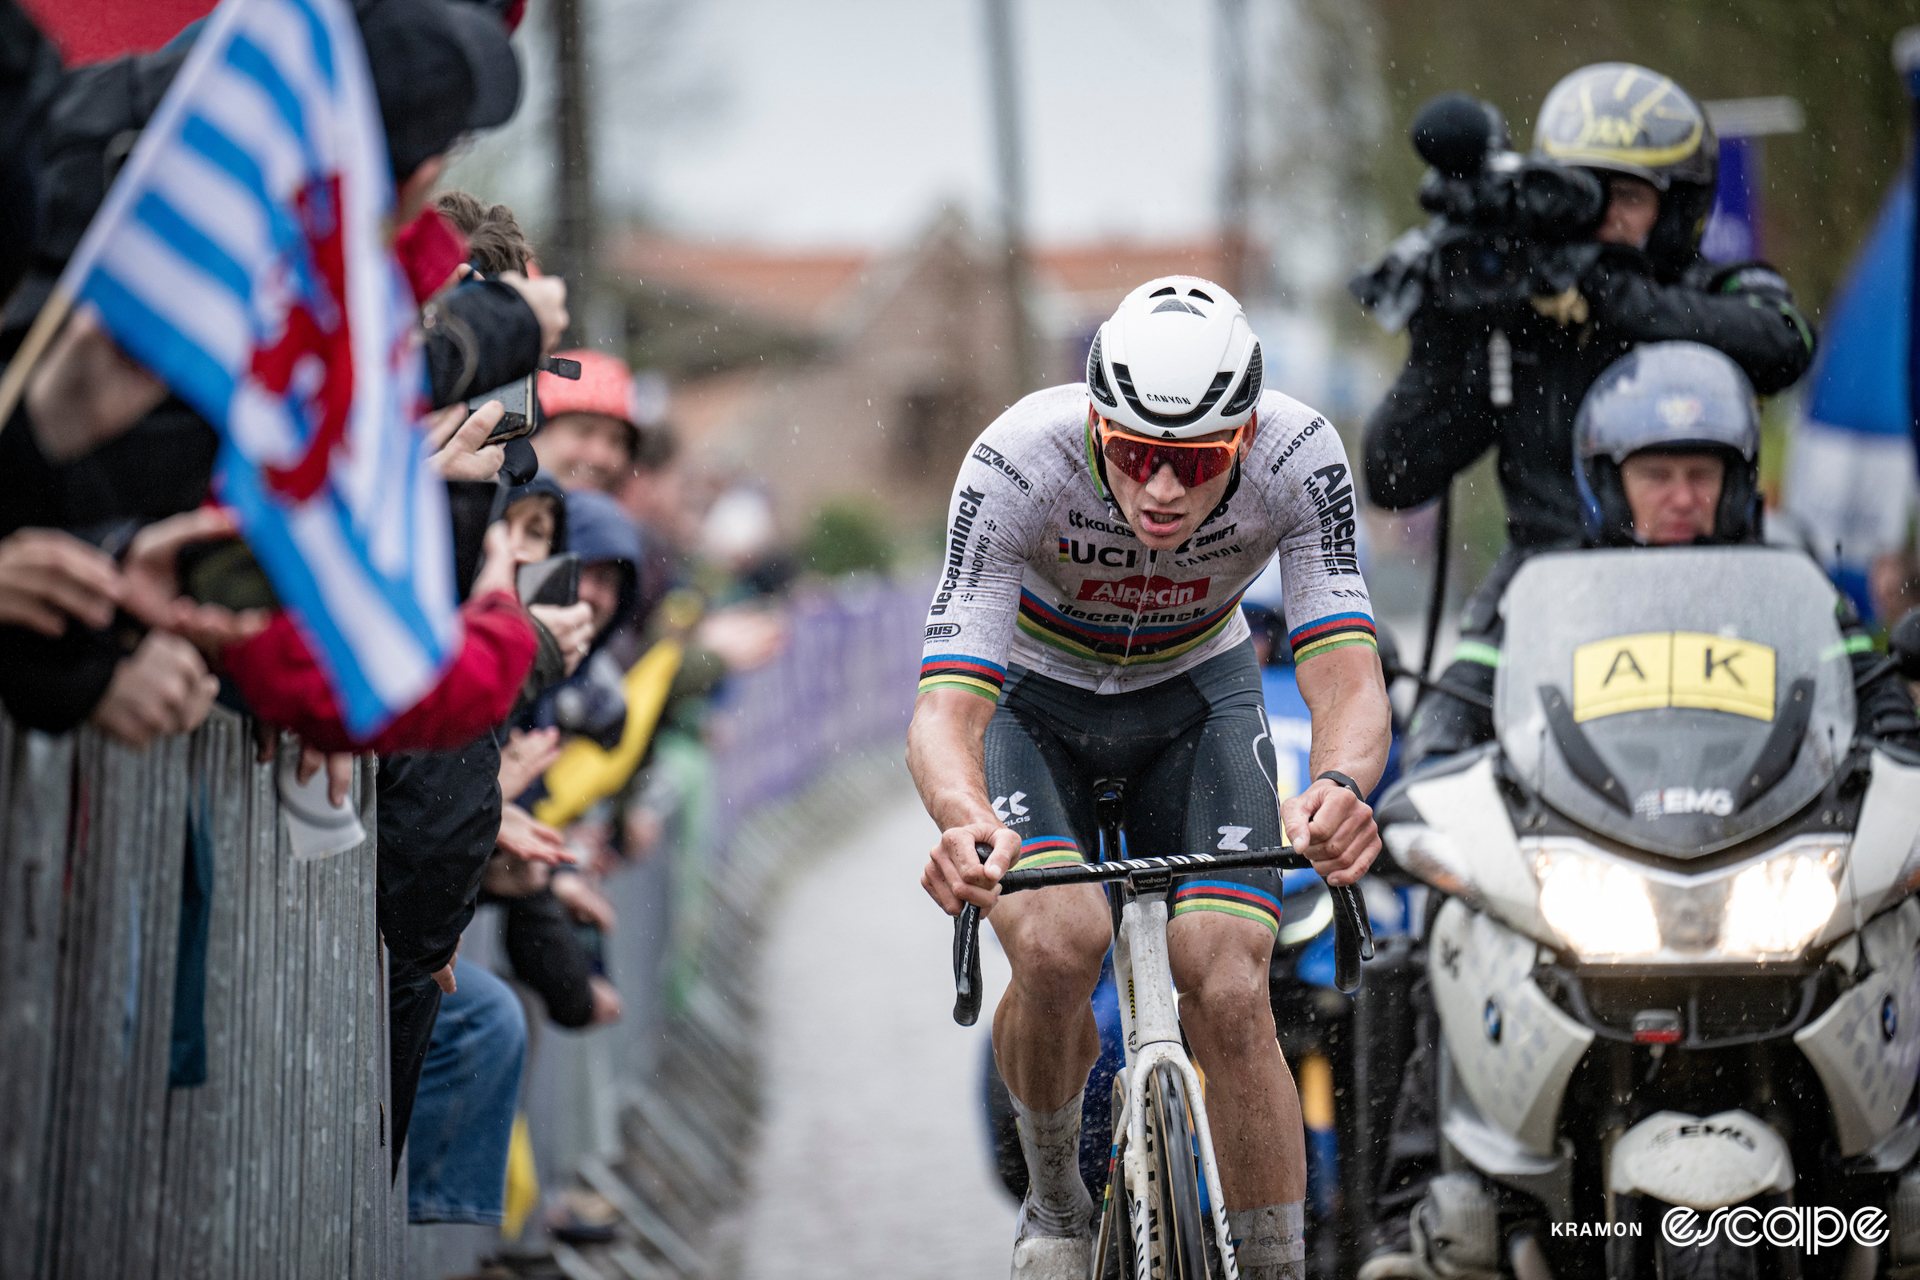 Mathieu van der Poel races in the rain at the Tour of Flanders. He's on the attack, alone late in the race and is trailed only by a TV moto and support vehicles with no other riders in sight.